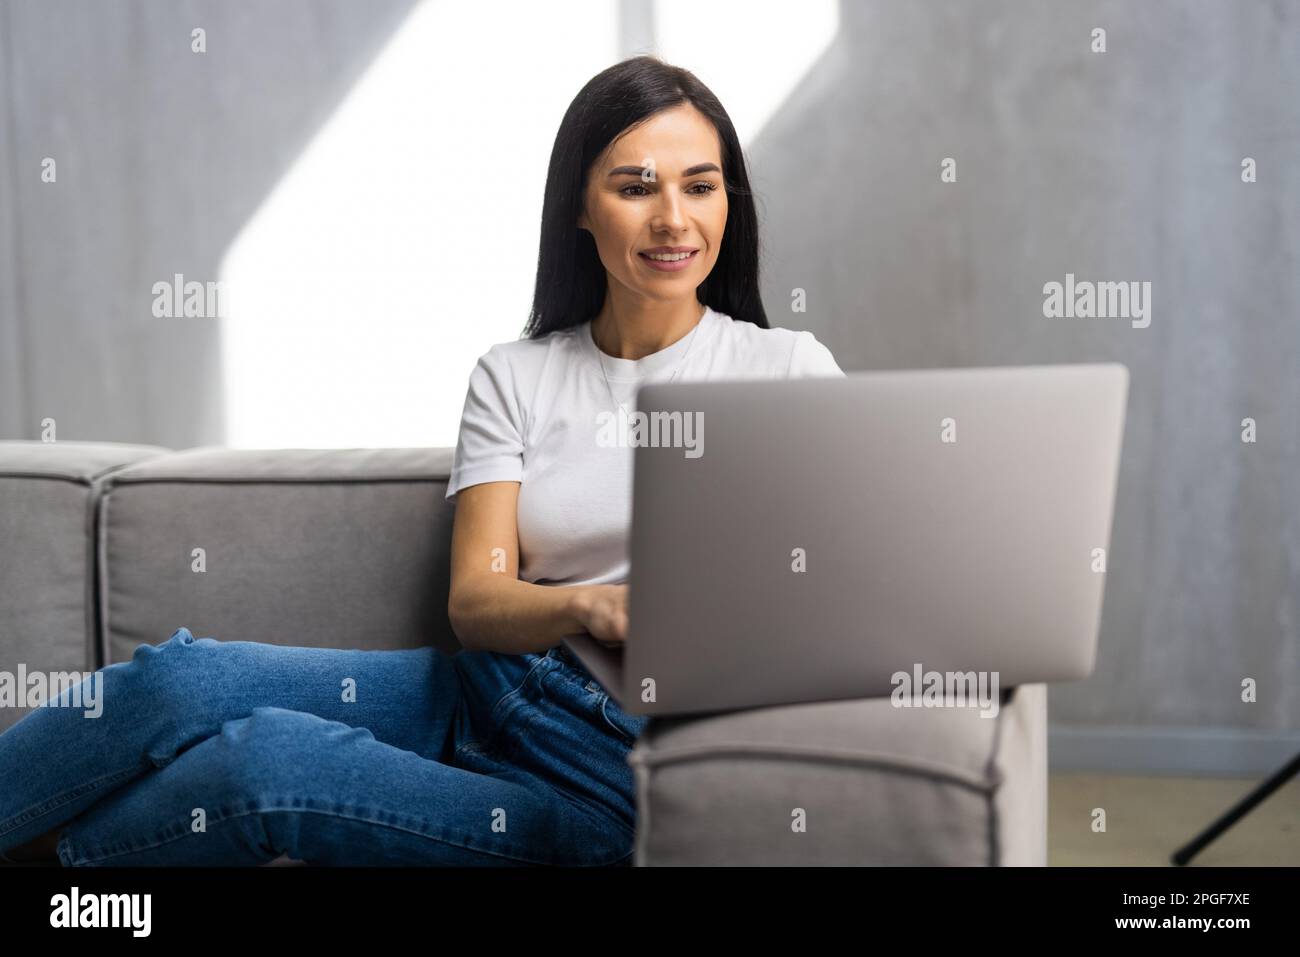 Photo of cheerful nice woman smiling and using laptop while sitting on couch in bright room Stock Photo